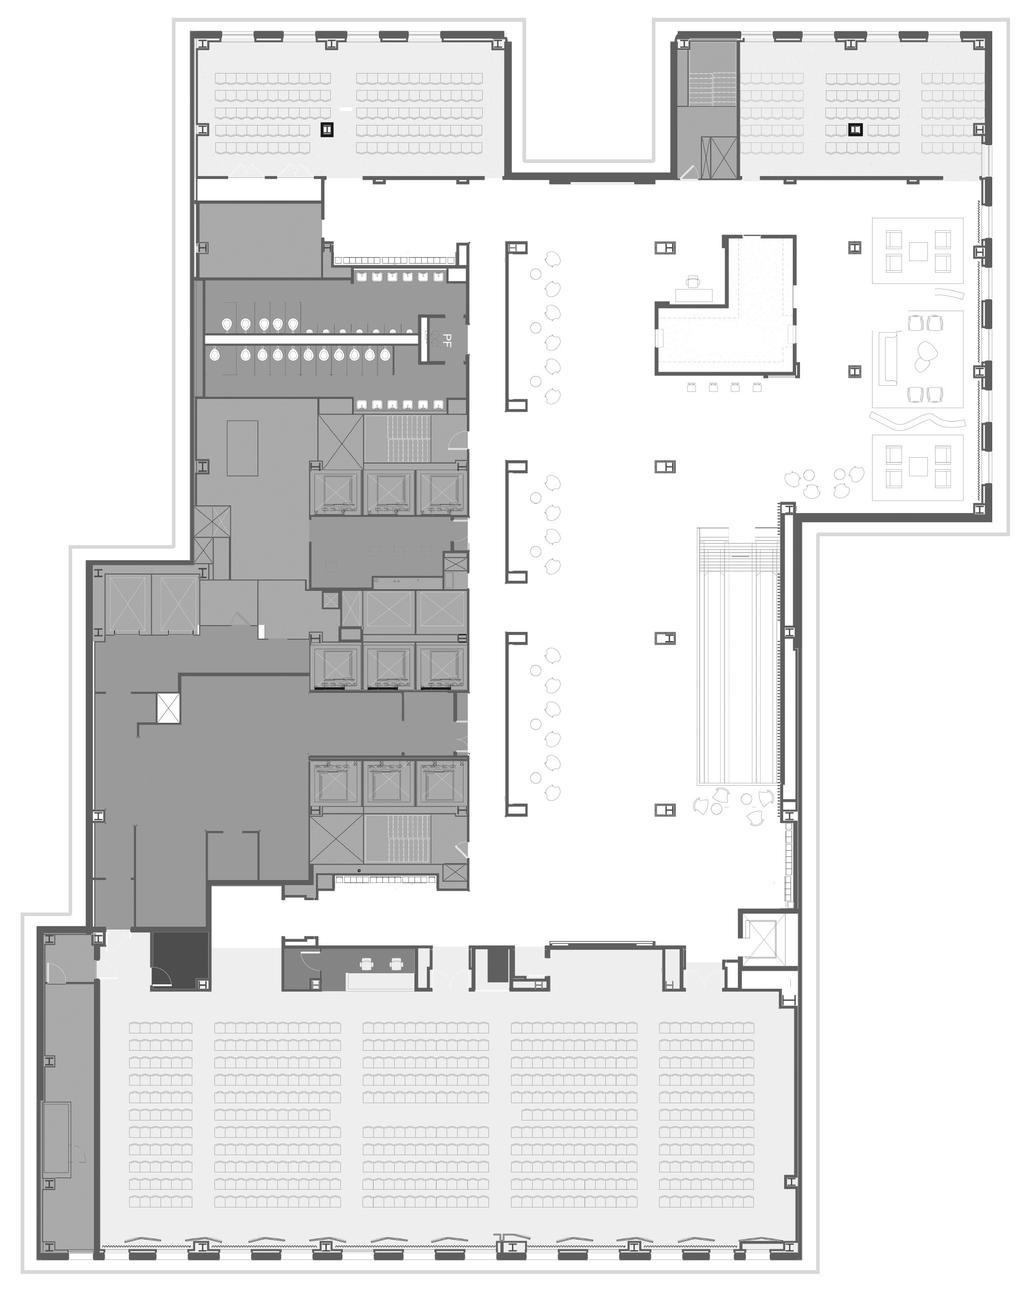 Floorplan & Capacities 117 W 46TH STREET Meeting Rooms DIMENSION (FT) AREA (FT 2 ) CEILING HEIGHT (FT) RECEPTION THEATER CLASSROOM PODS DINING Forum 113' x 40' 4,520' 13' 700 410 280 260 350 Forum A